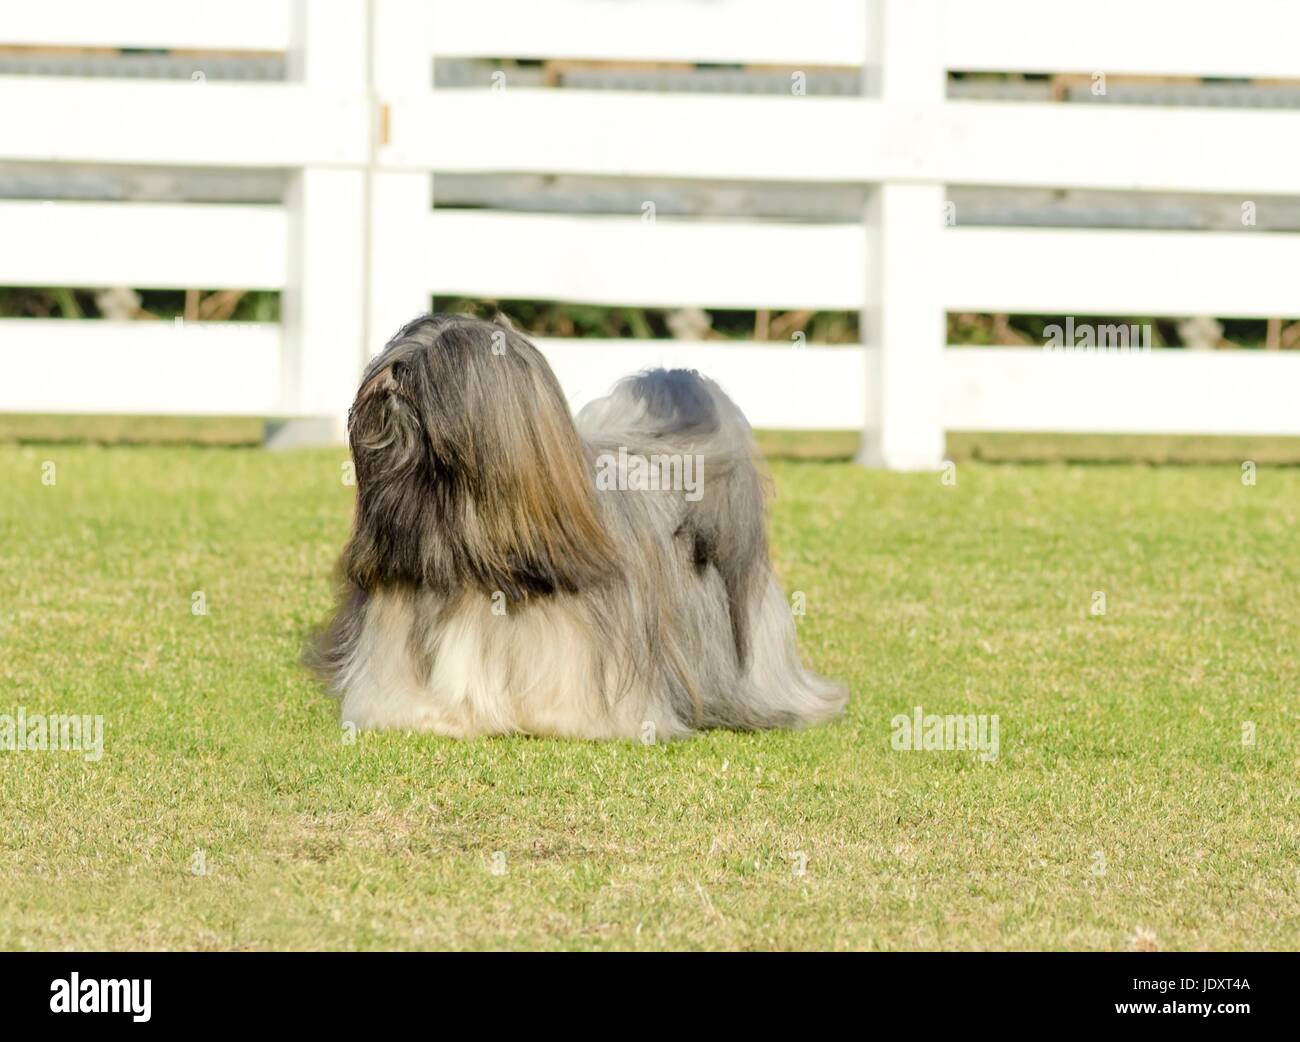 A small young light tan, fawn, beige, gray and white Lhasa Apso dog with a long silky coat standing on the grass. The long haired, bearded Lasa dog has heavy straight long coat and is a companion dog. Stock Photo